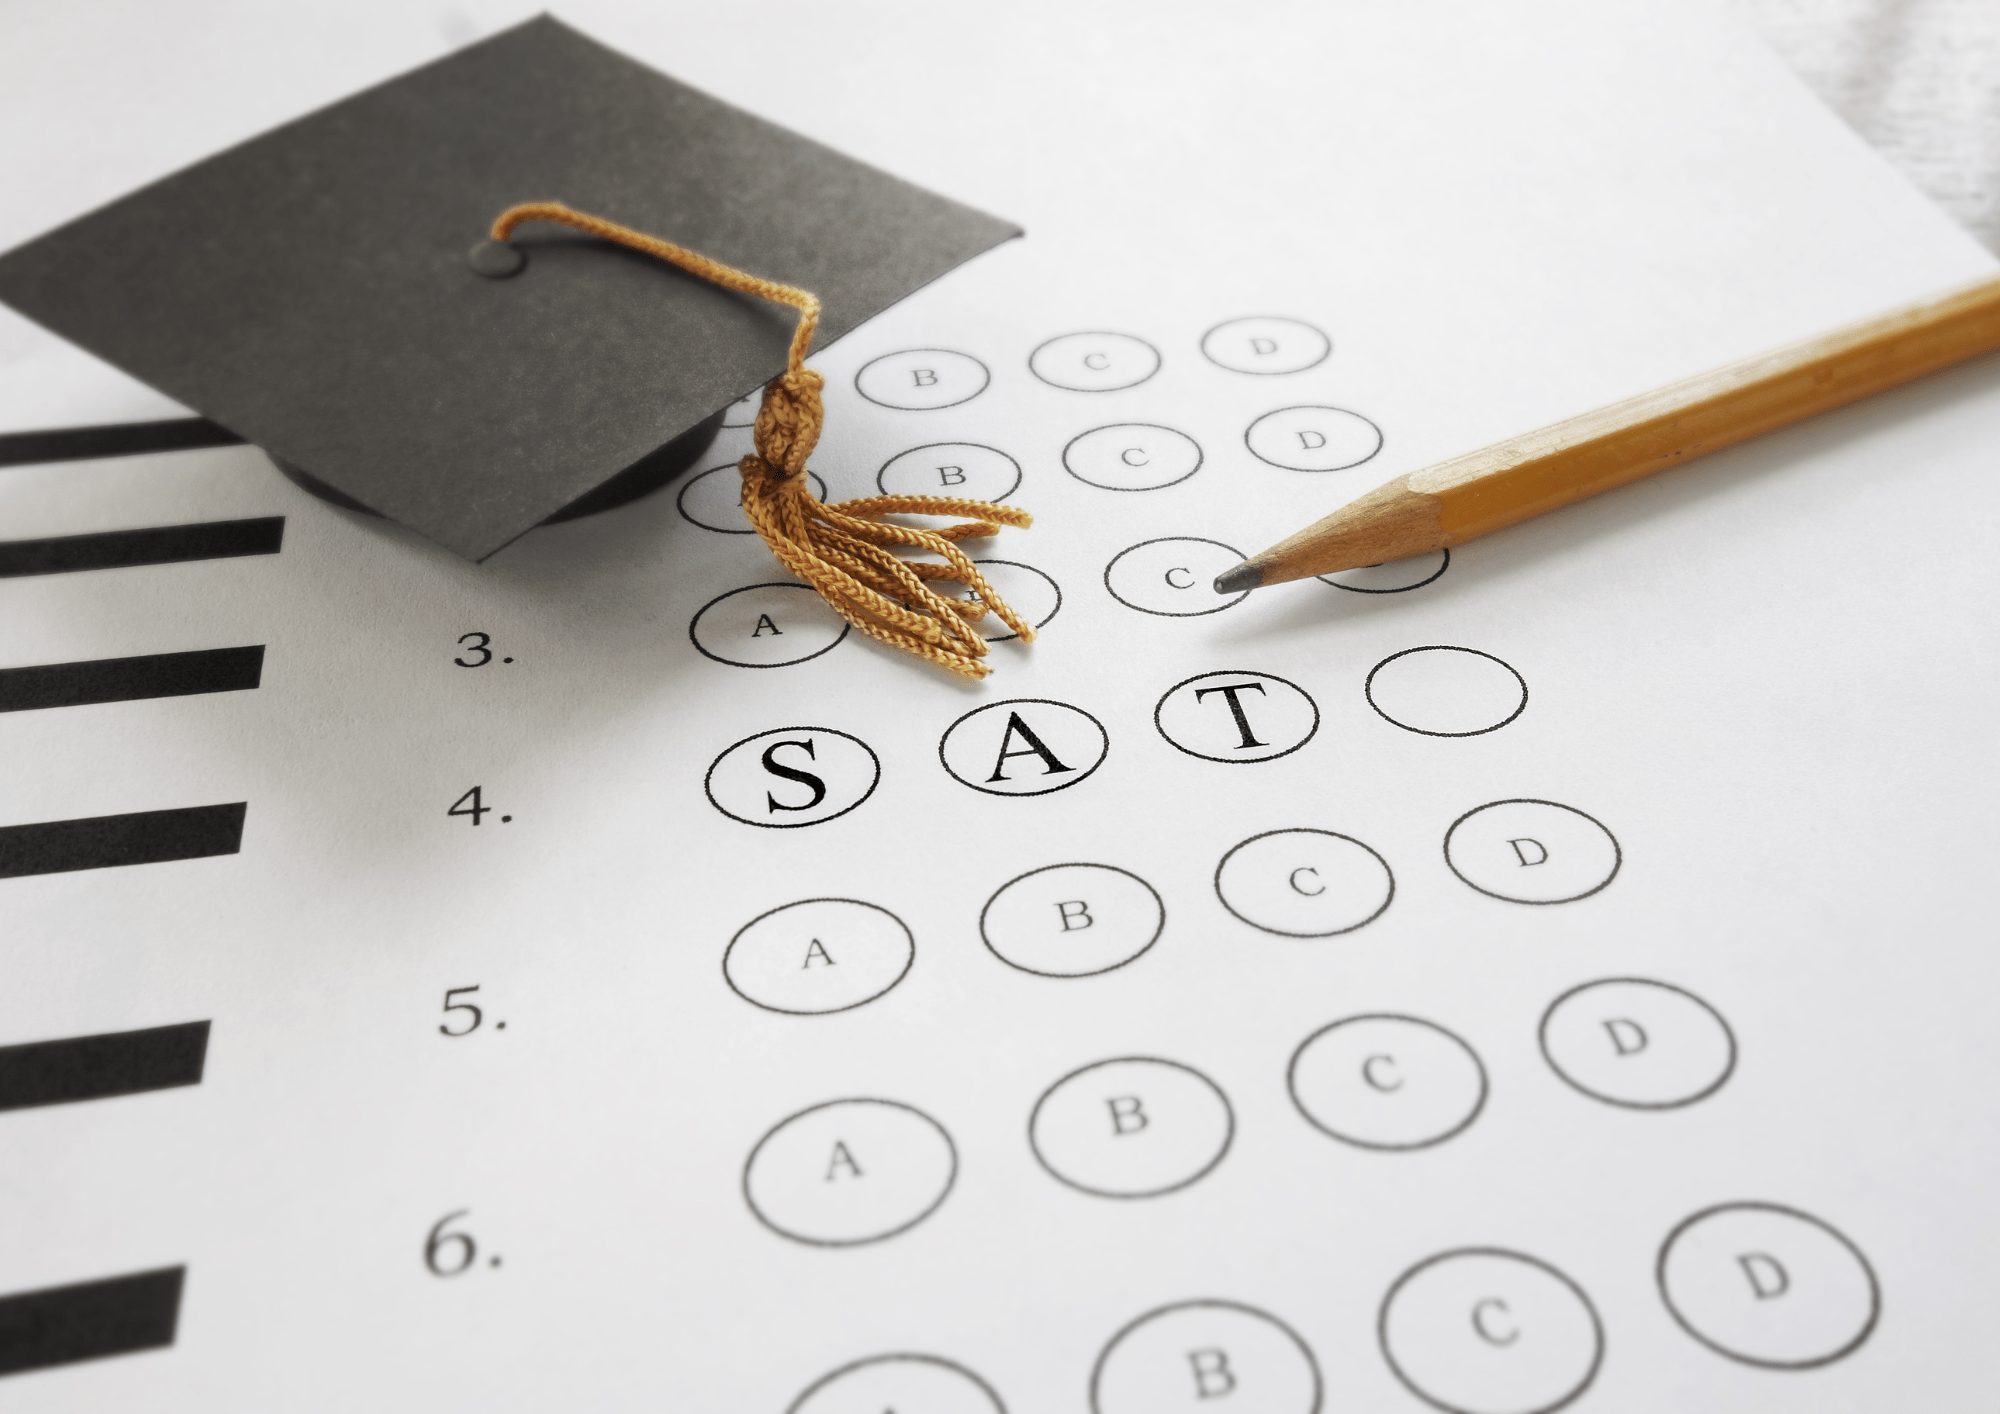 The image shows a close-up of an SAT answer sheet with filled-in bubbles spelling “SAT”. A sharpened yellow pencil is pointing towards the answer choices, resting on the paper. A small black graduation cap with a golden tassel is placed on the left side of the answer sheet. The background is white and clean, focusing attention on the answer sheet, pencil, and graduation cap. The mood of the image suggests a connection between taking standardized tests like the SAT and academic achievement symbolized by the graduation cap. The text on the answer sheet reads, “3. A B C D, 4. S A T O, 5. A B C D, 6. A B C D”.